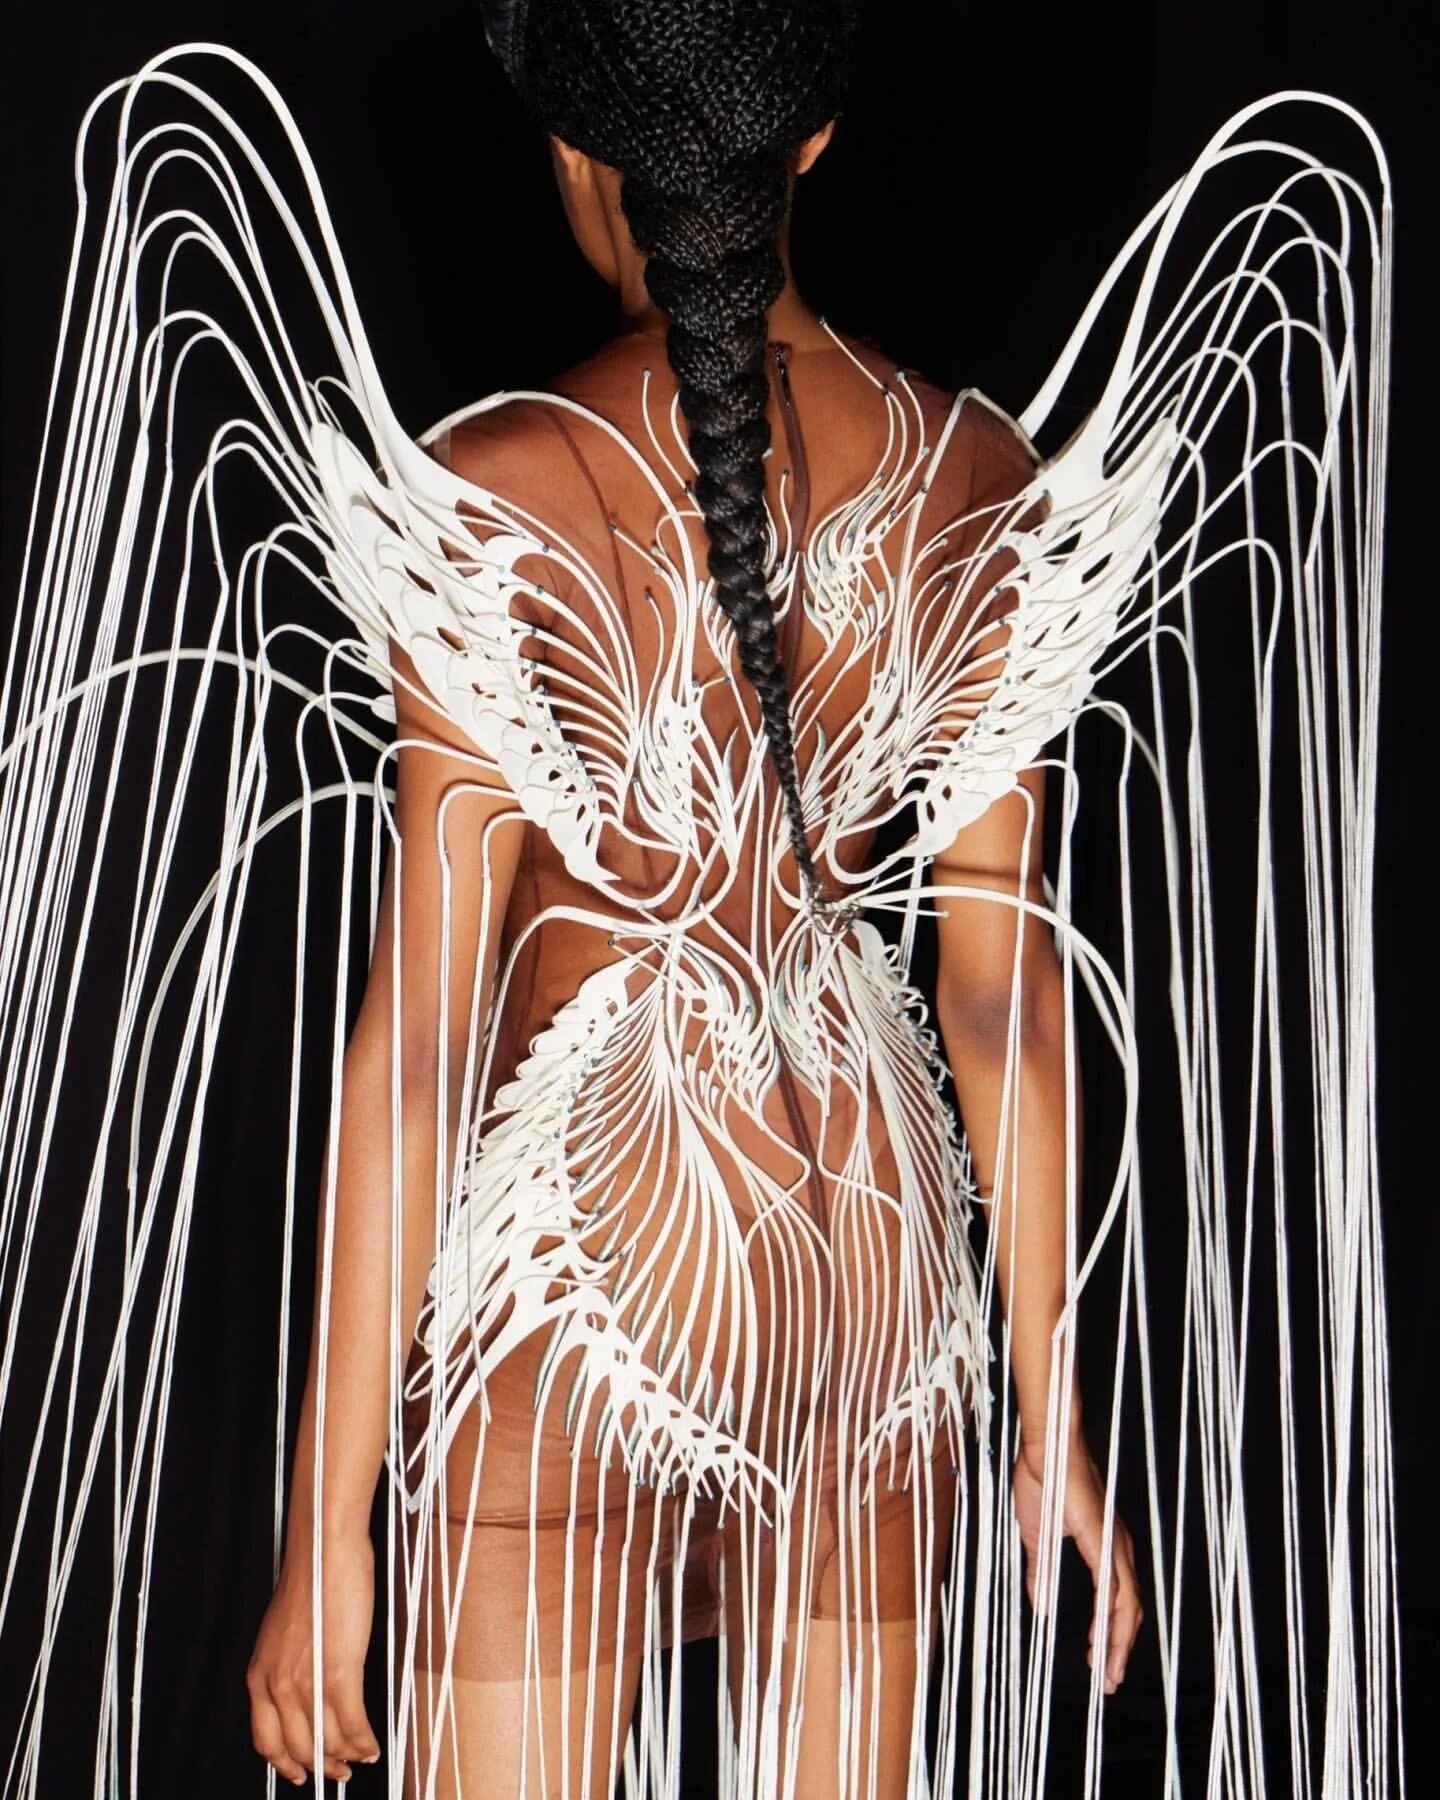 This butterfly look is straight 🔥🔥🔥!
Posted @withregram &bull; @tourist.souvenirs Iris van Herpen Fall 2022 Couture
.
.
.
#dfcconnects #dfcthrives #detroitfashionblogger #detroitfashioncommunity #detroitfashionnews #detroitmodels #detroitfashionga